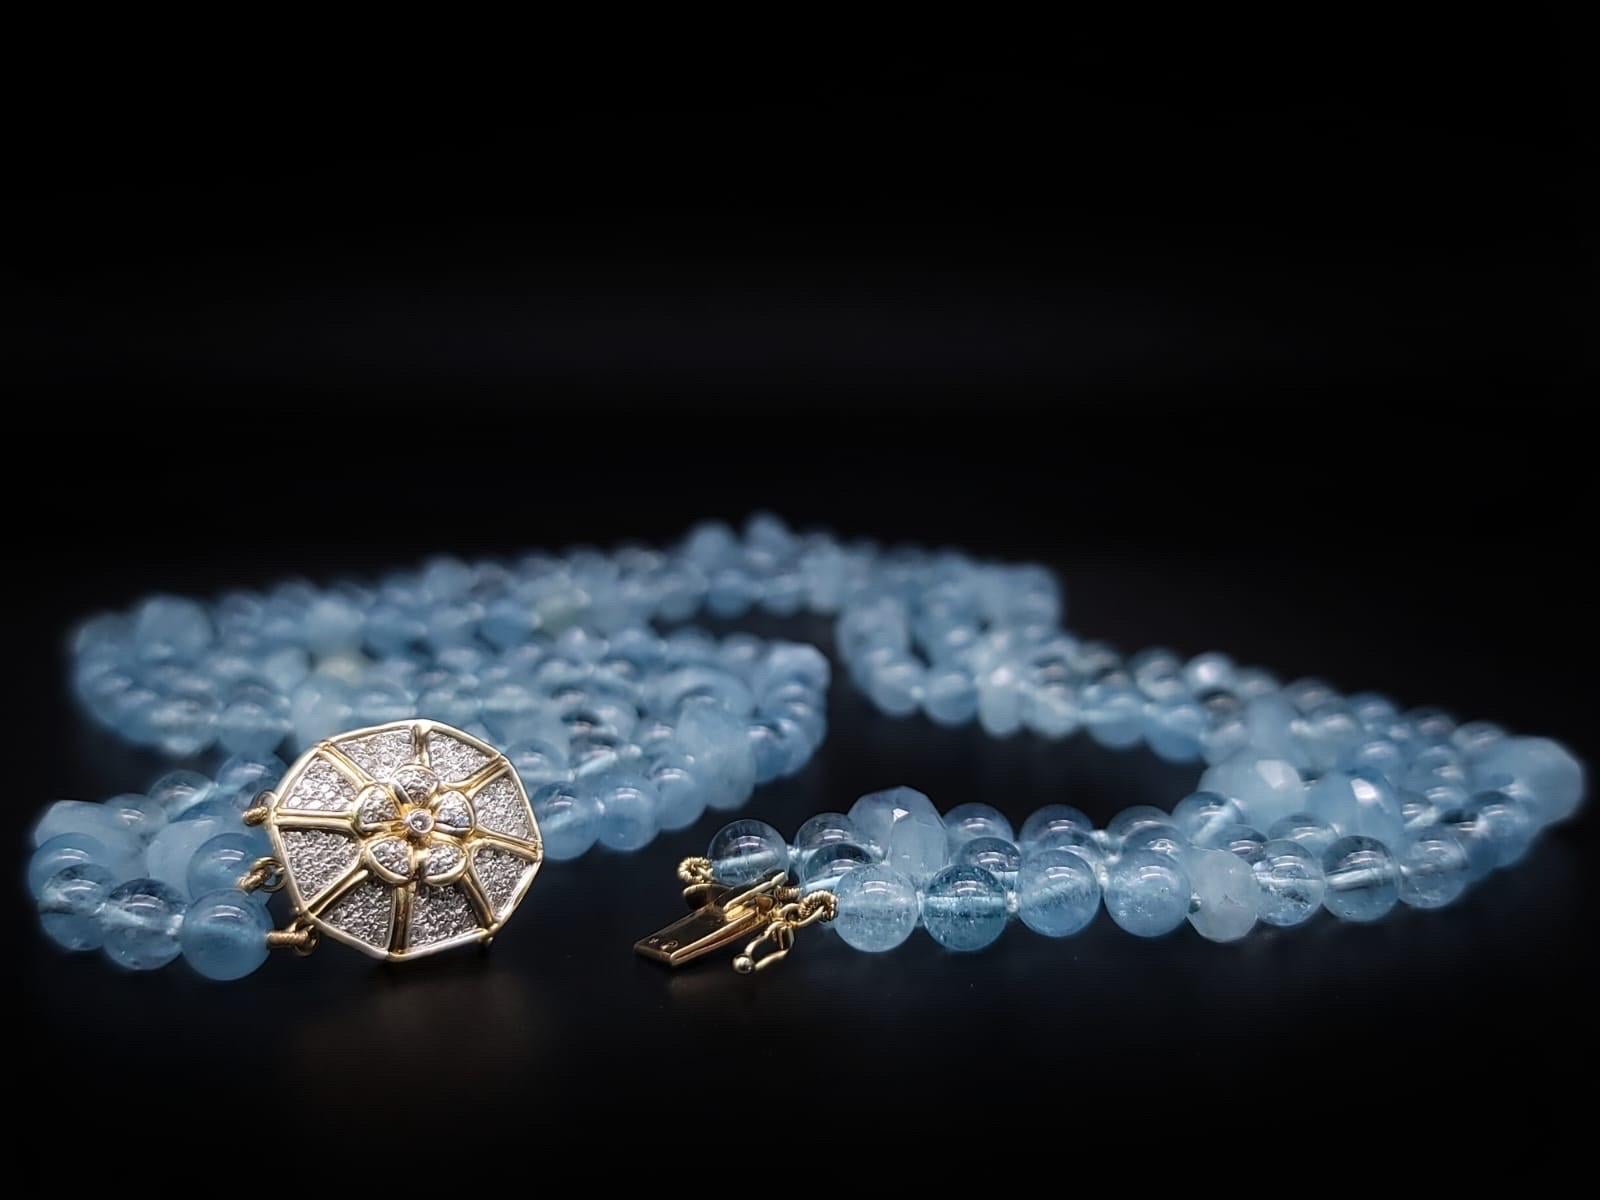 A.Jeschel AAA Aquamarine necklace with a 14k Gold Diamond clasp. 10